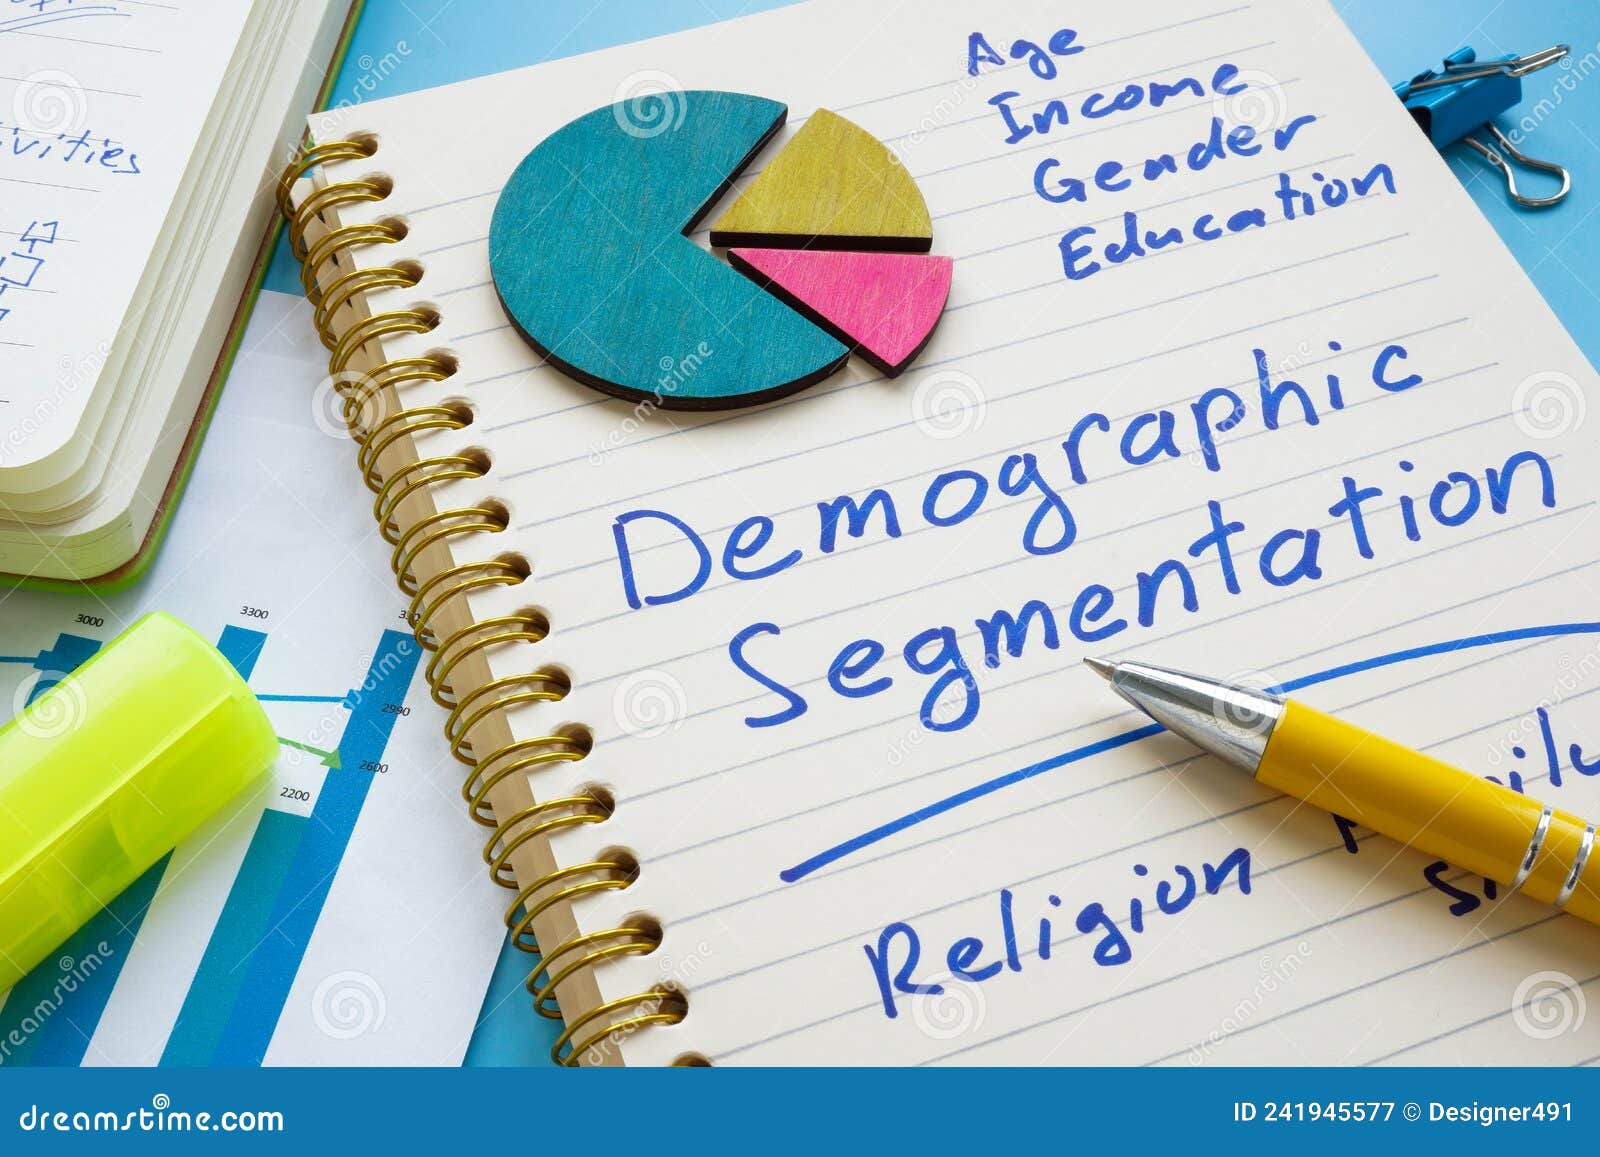 demographic segmentation list on the page and papers.